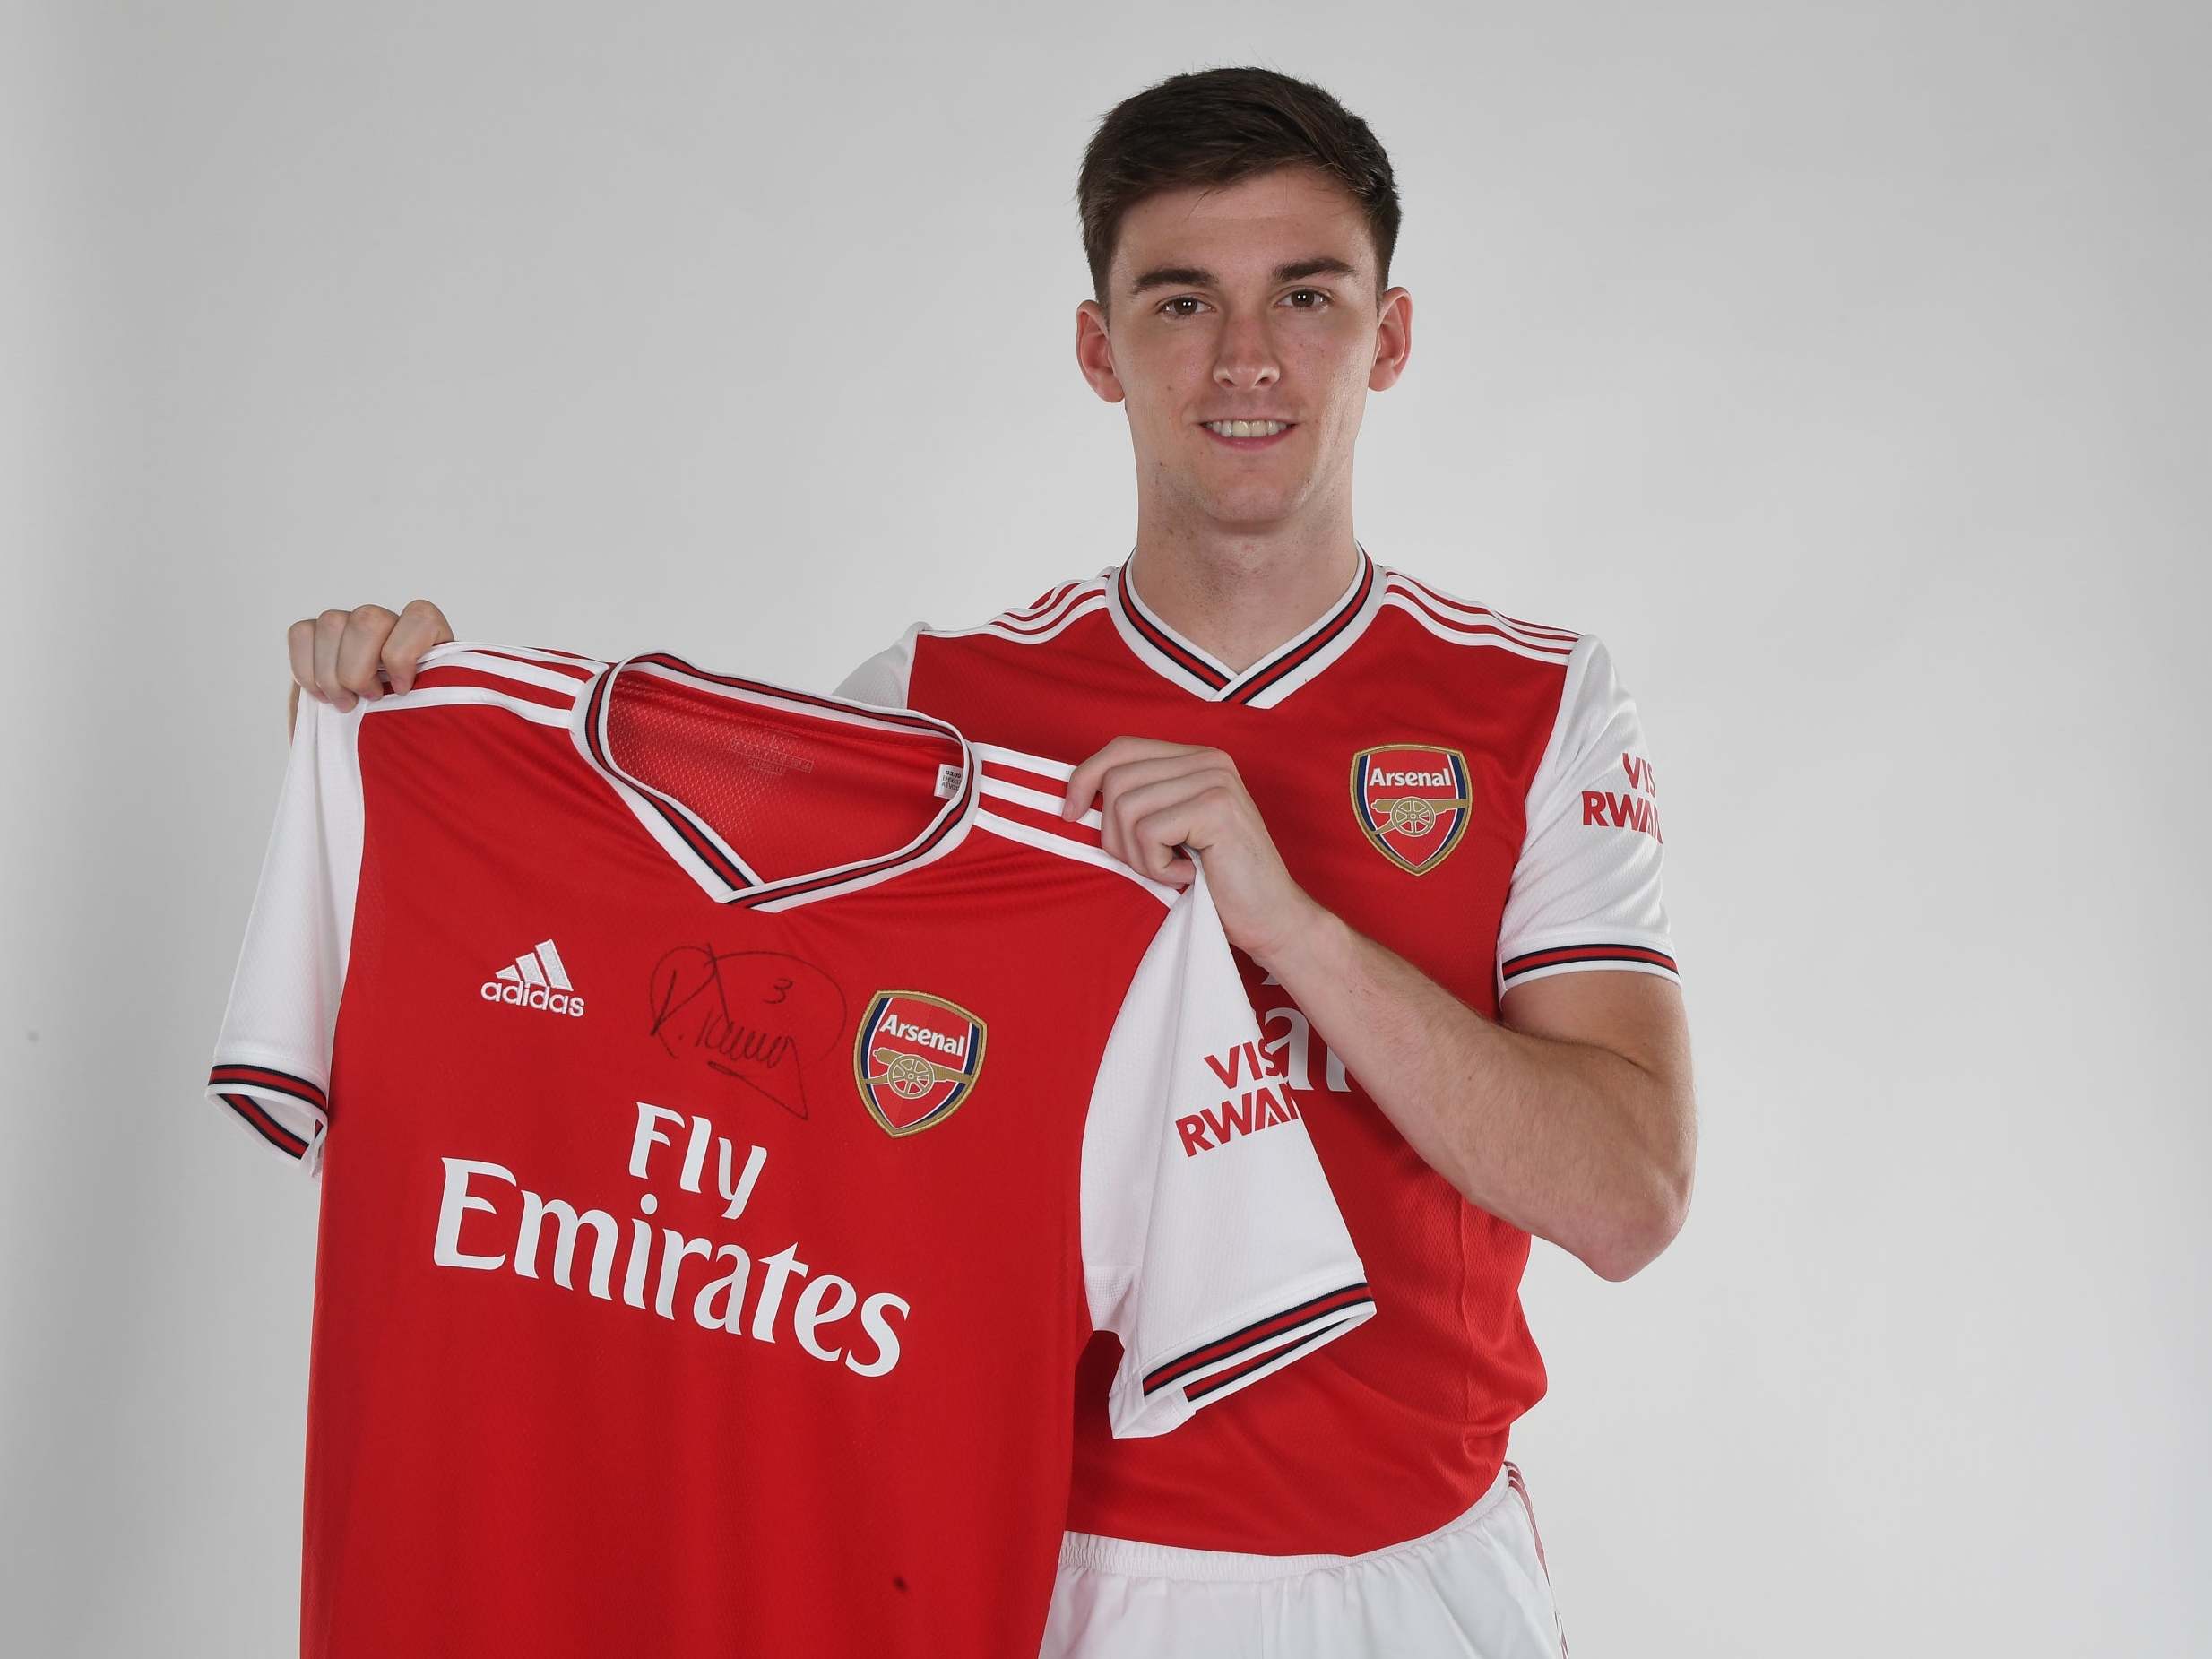 tierney in arsenal shirt